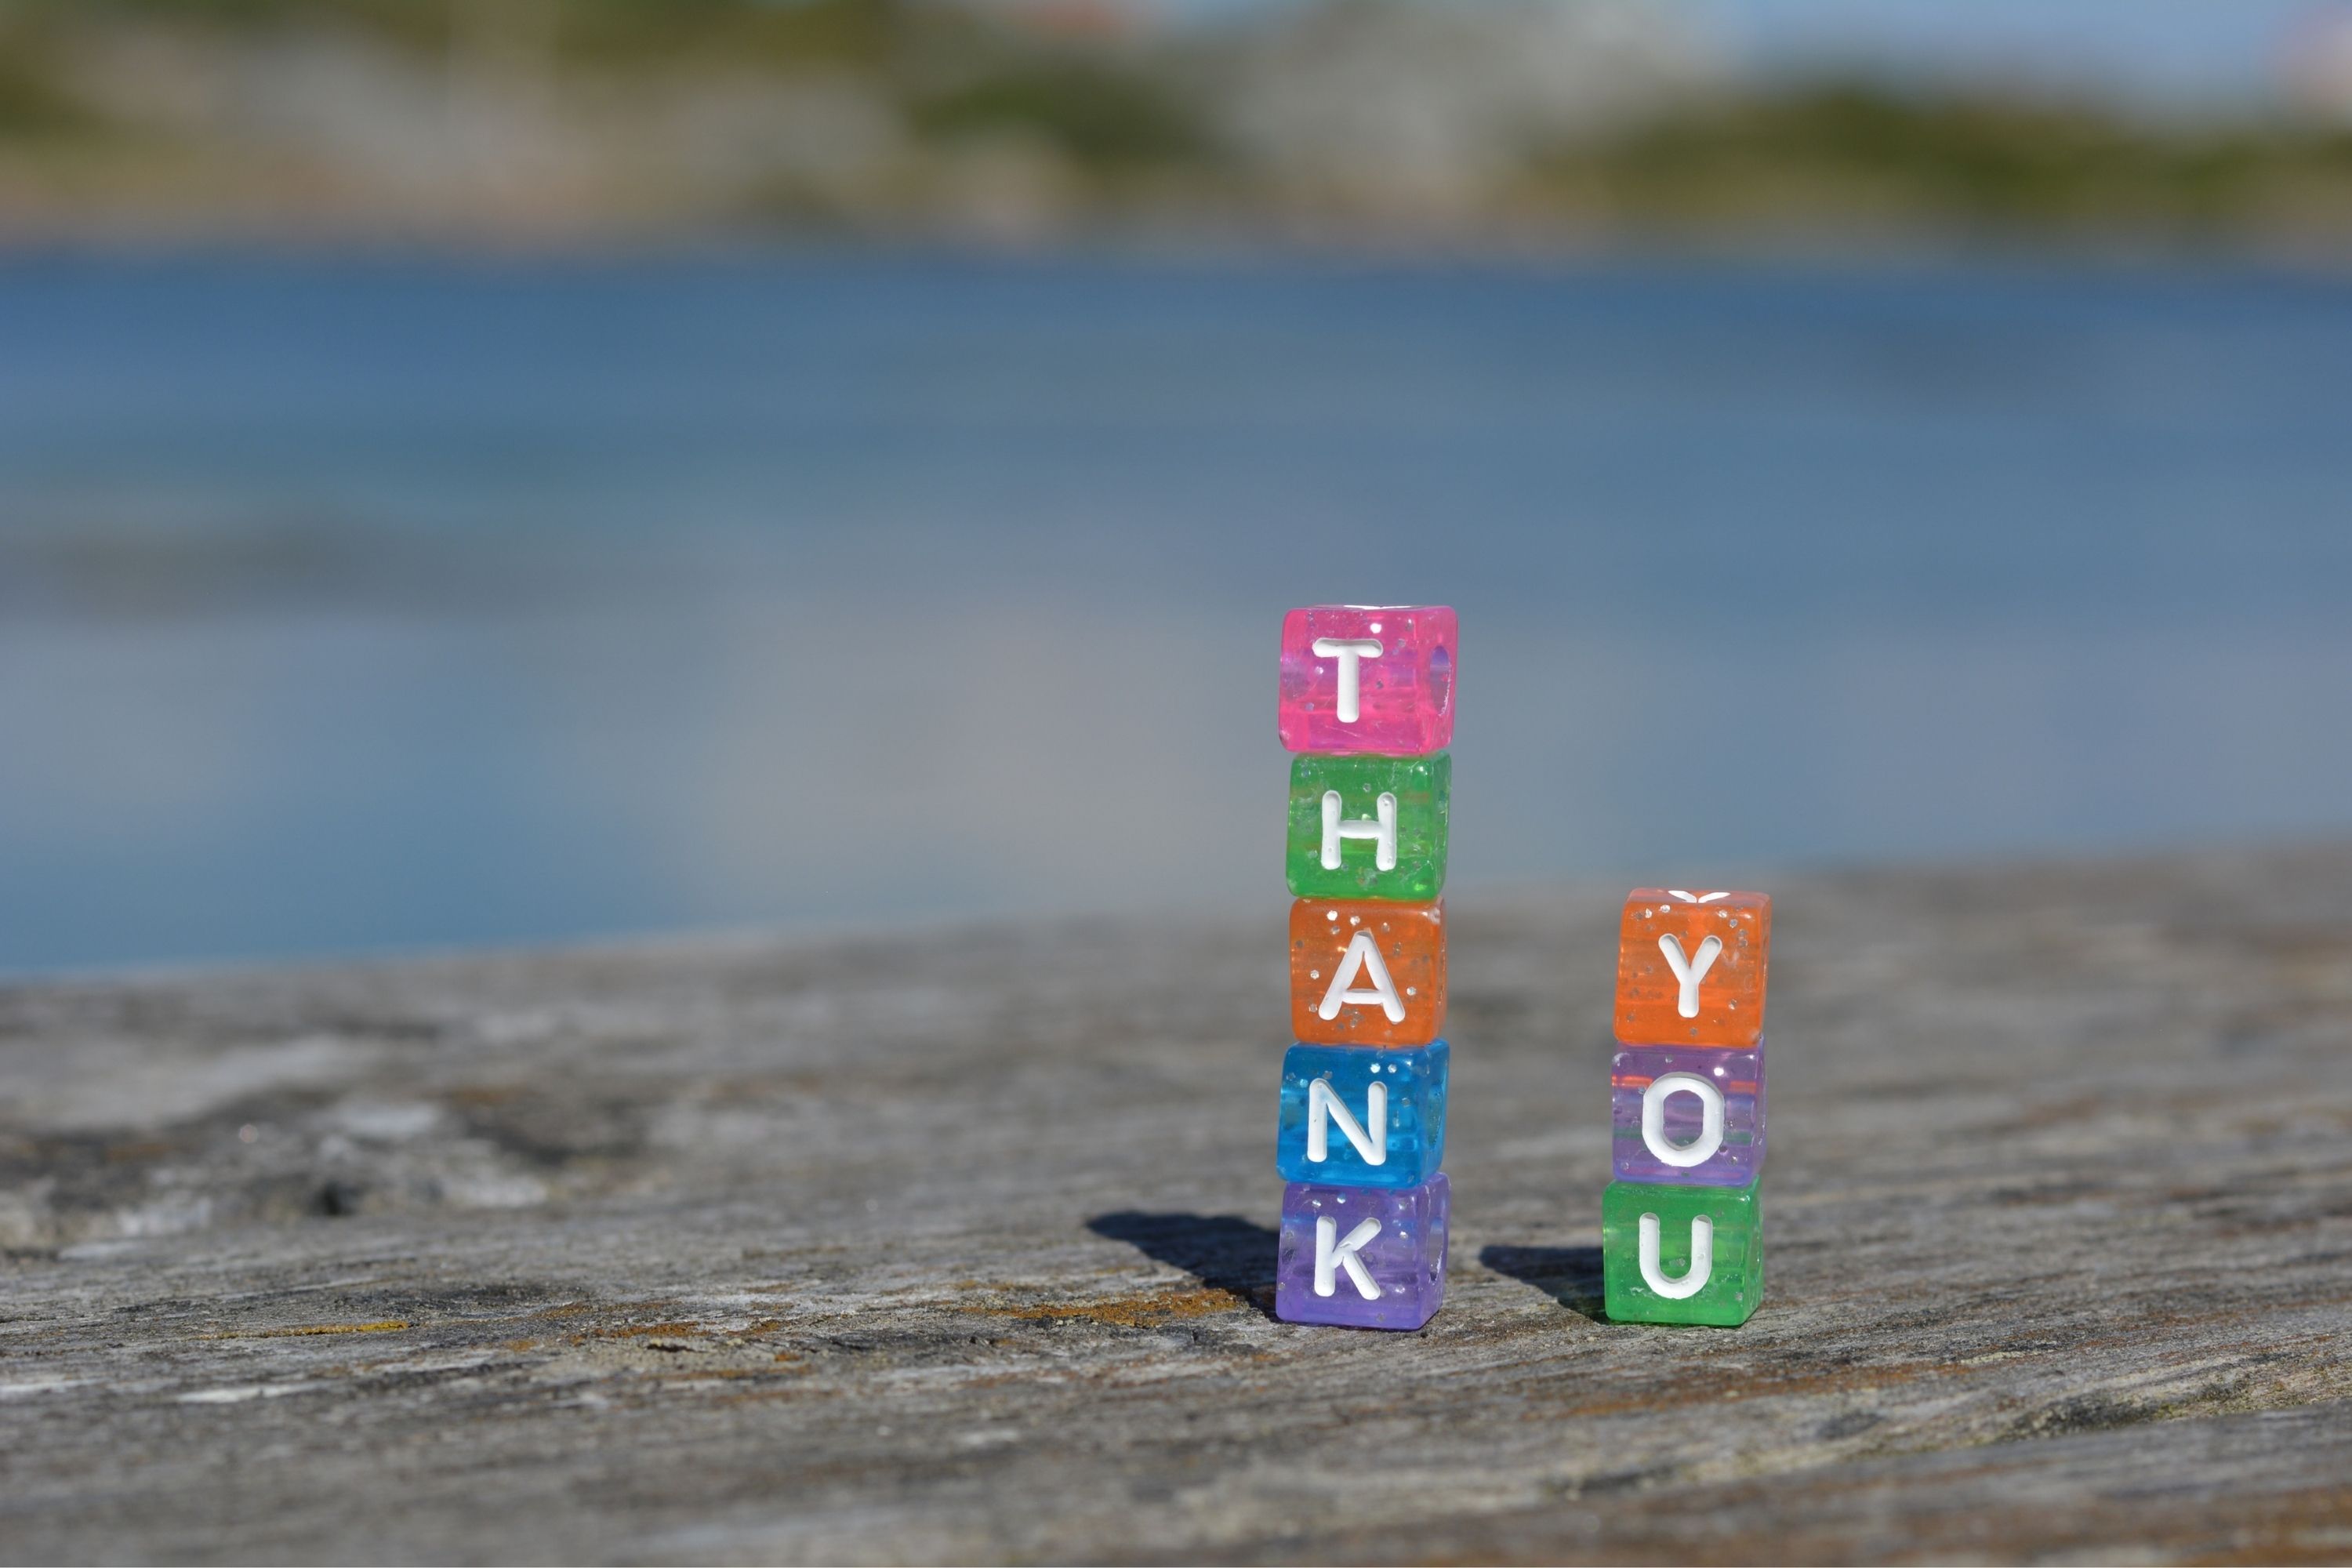 What Is the Origin Of the “Thank You” Phrase (2)